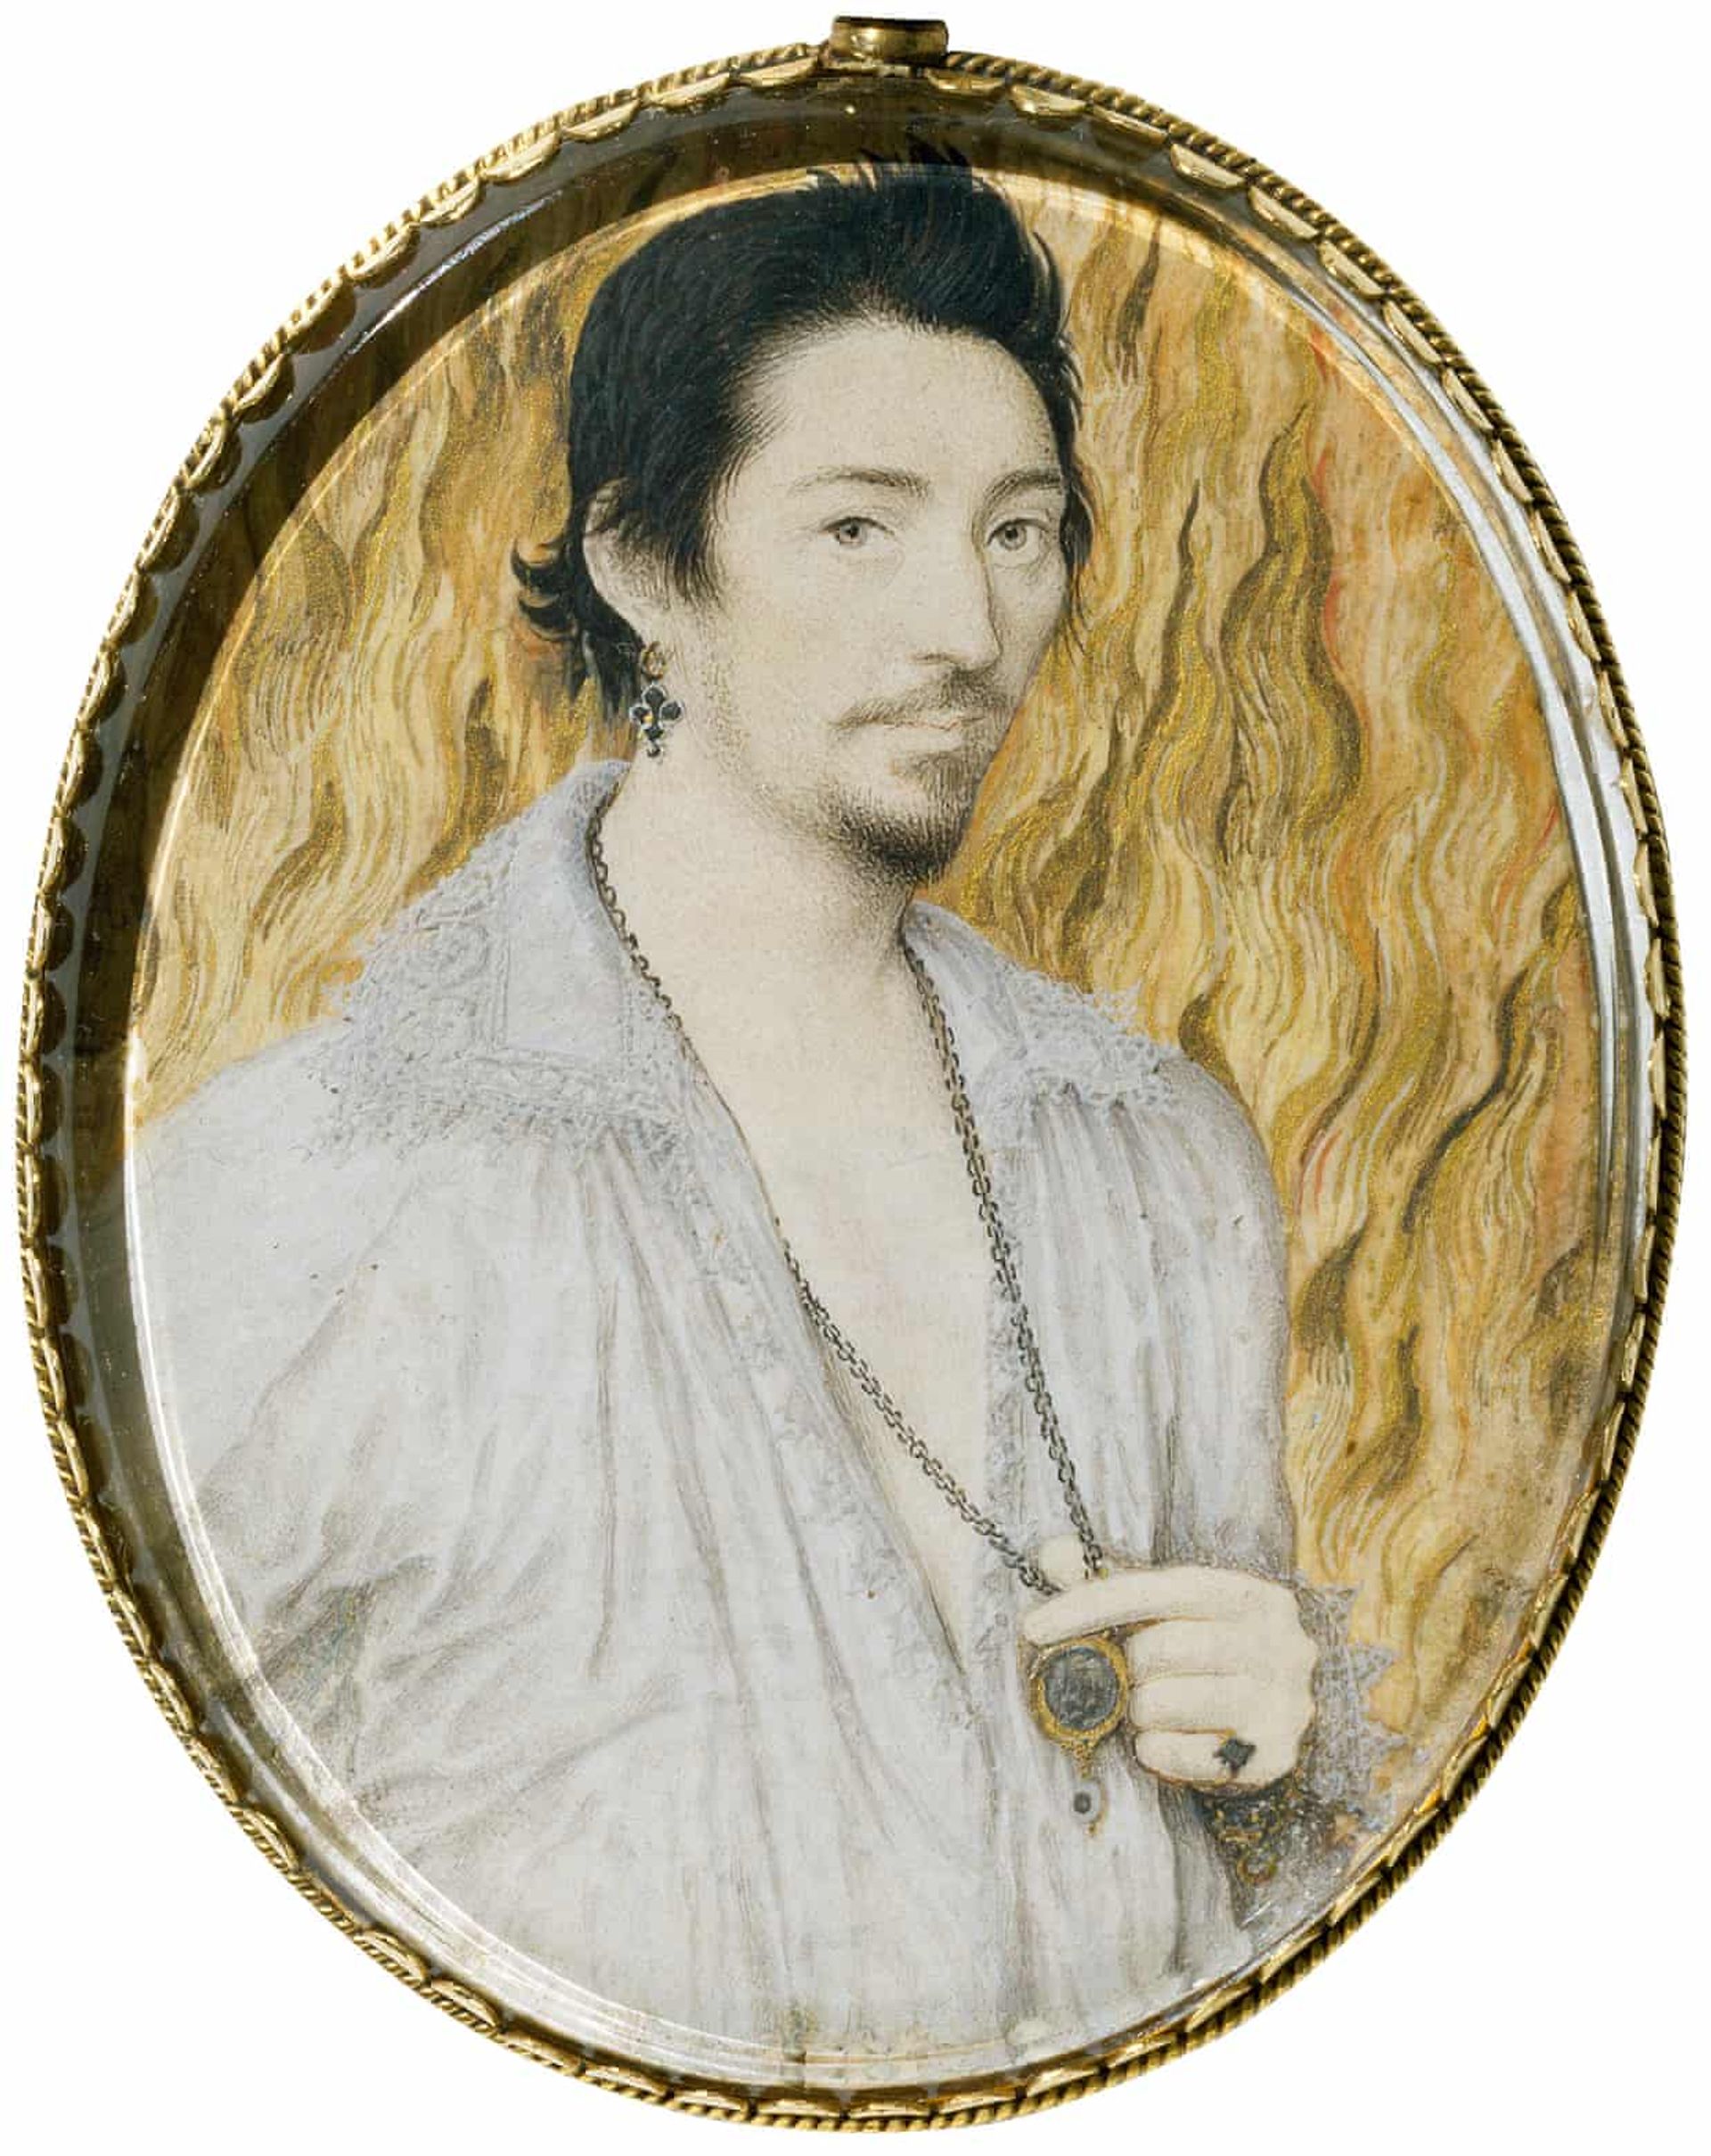 Nicholas Hilliard’s portrait of an unknown man against a background of flames Photo: Clare Johnson/Victoria and Albert Museum, London